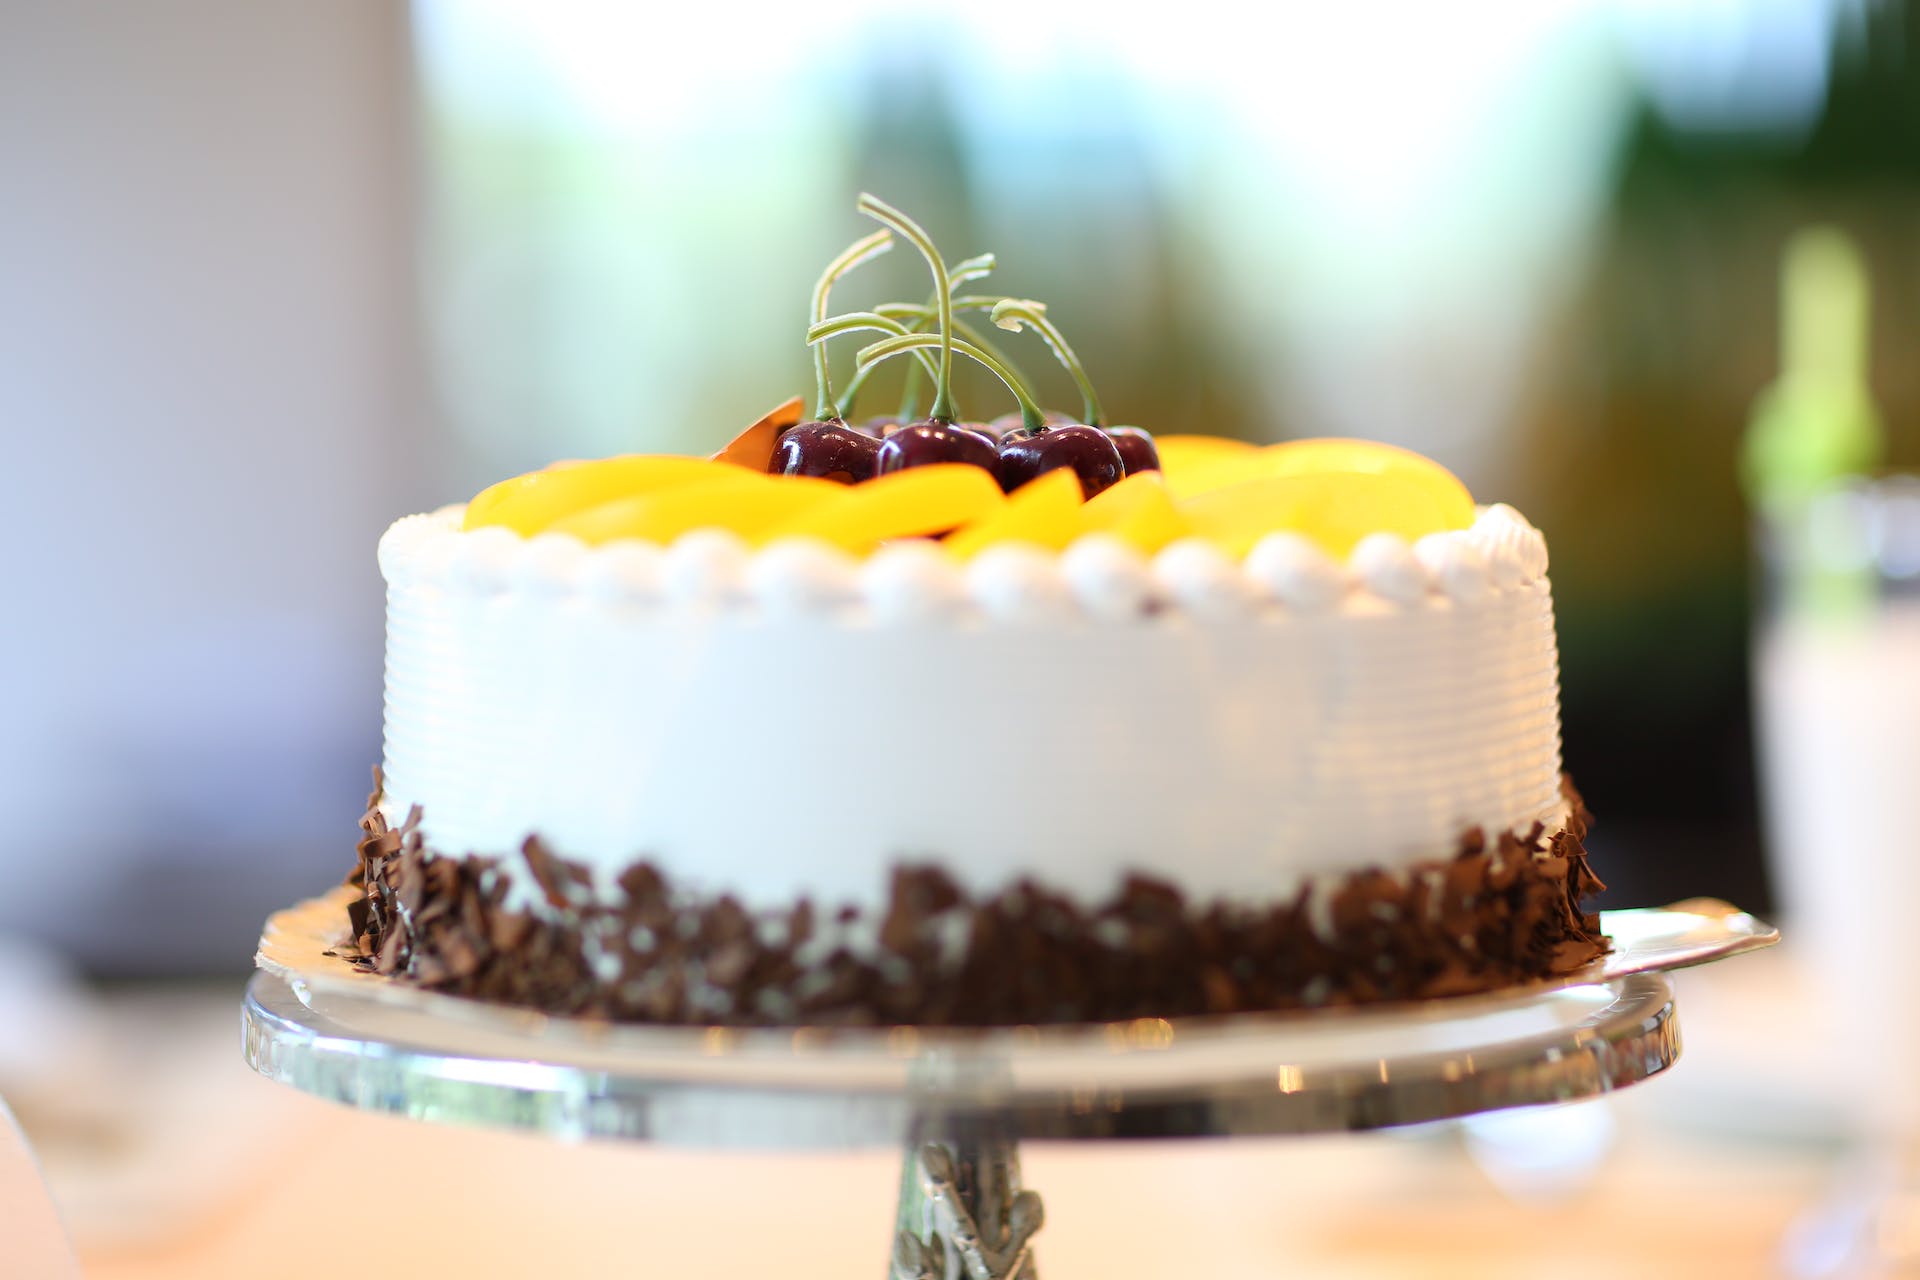 A cake topped with fruit | Source: Pexels